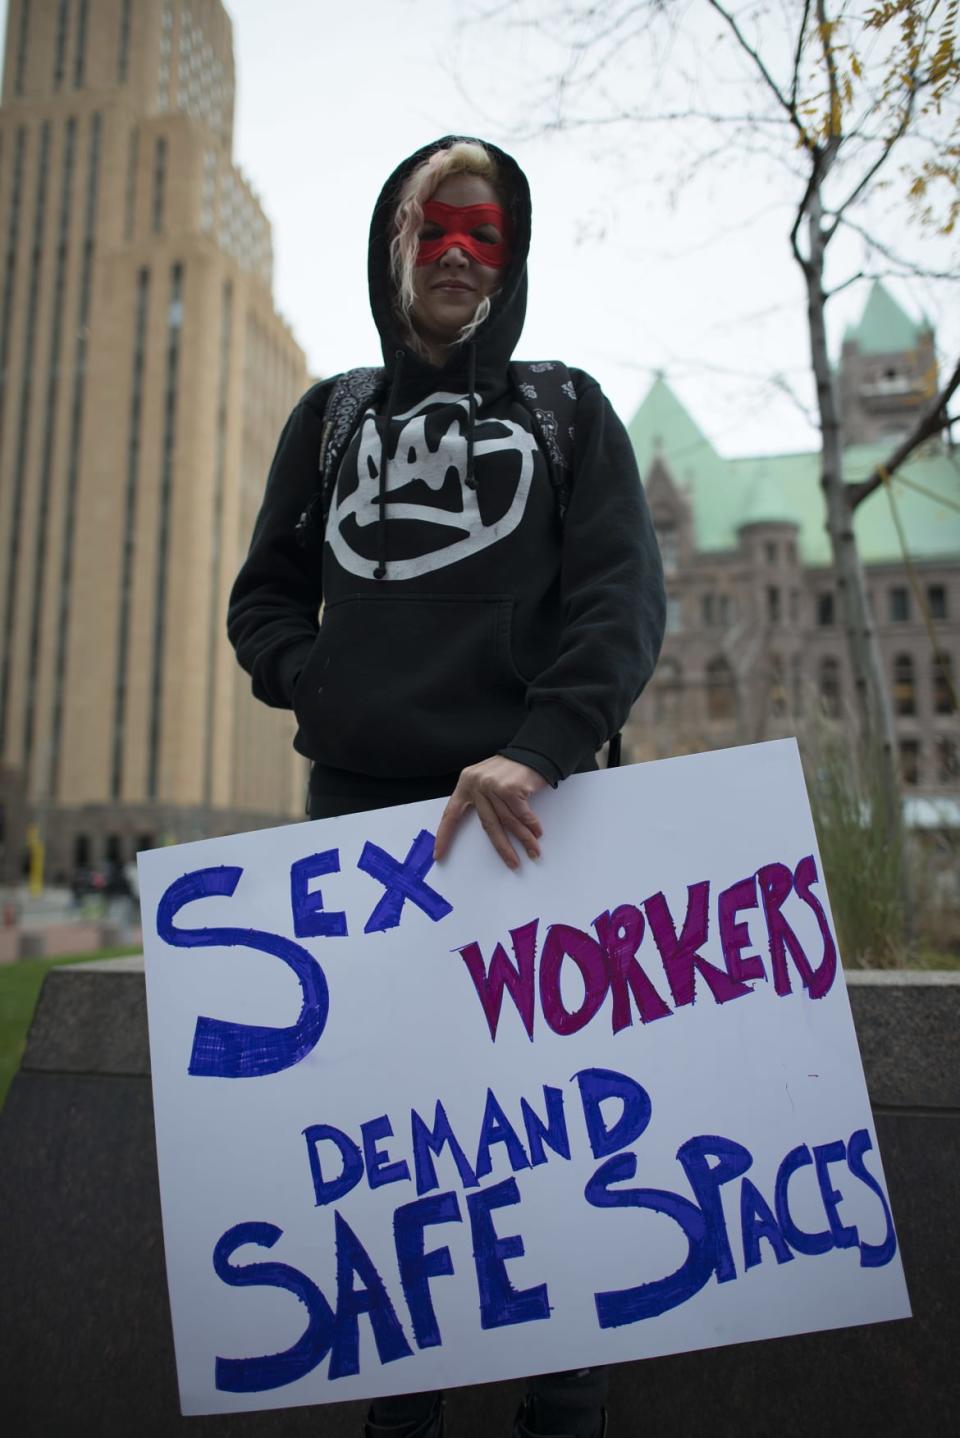 <div class="inline-image__caption"><p>Sex Workers and their supporters rallied in Minnesota in 2016 to protest a law enforcement crackdown on Backpage.com.</p></div> <div class="inline-image__credit">Fibonacci Blue/Wikimedia Commons</div>